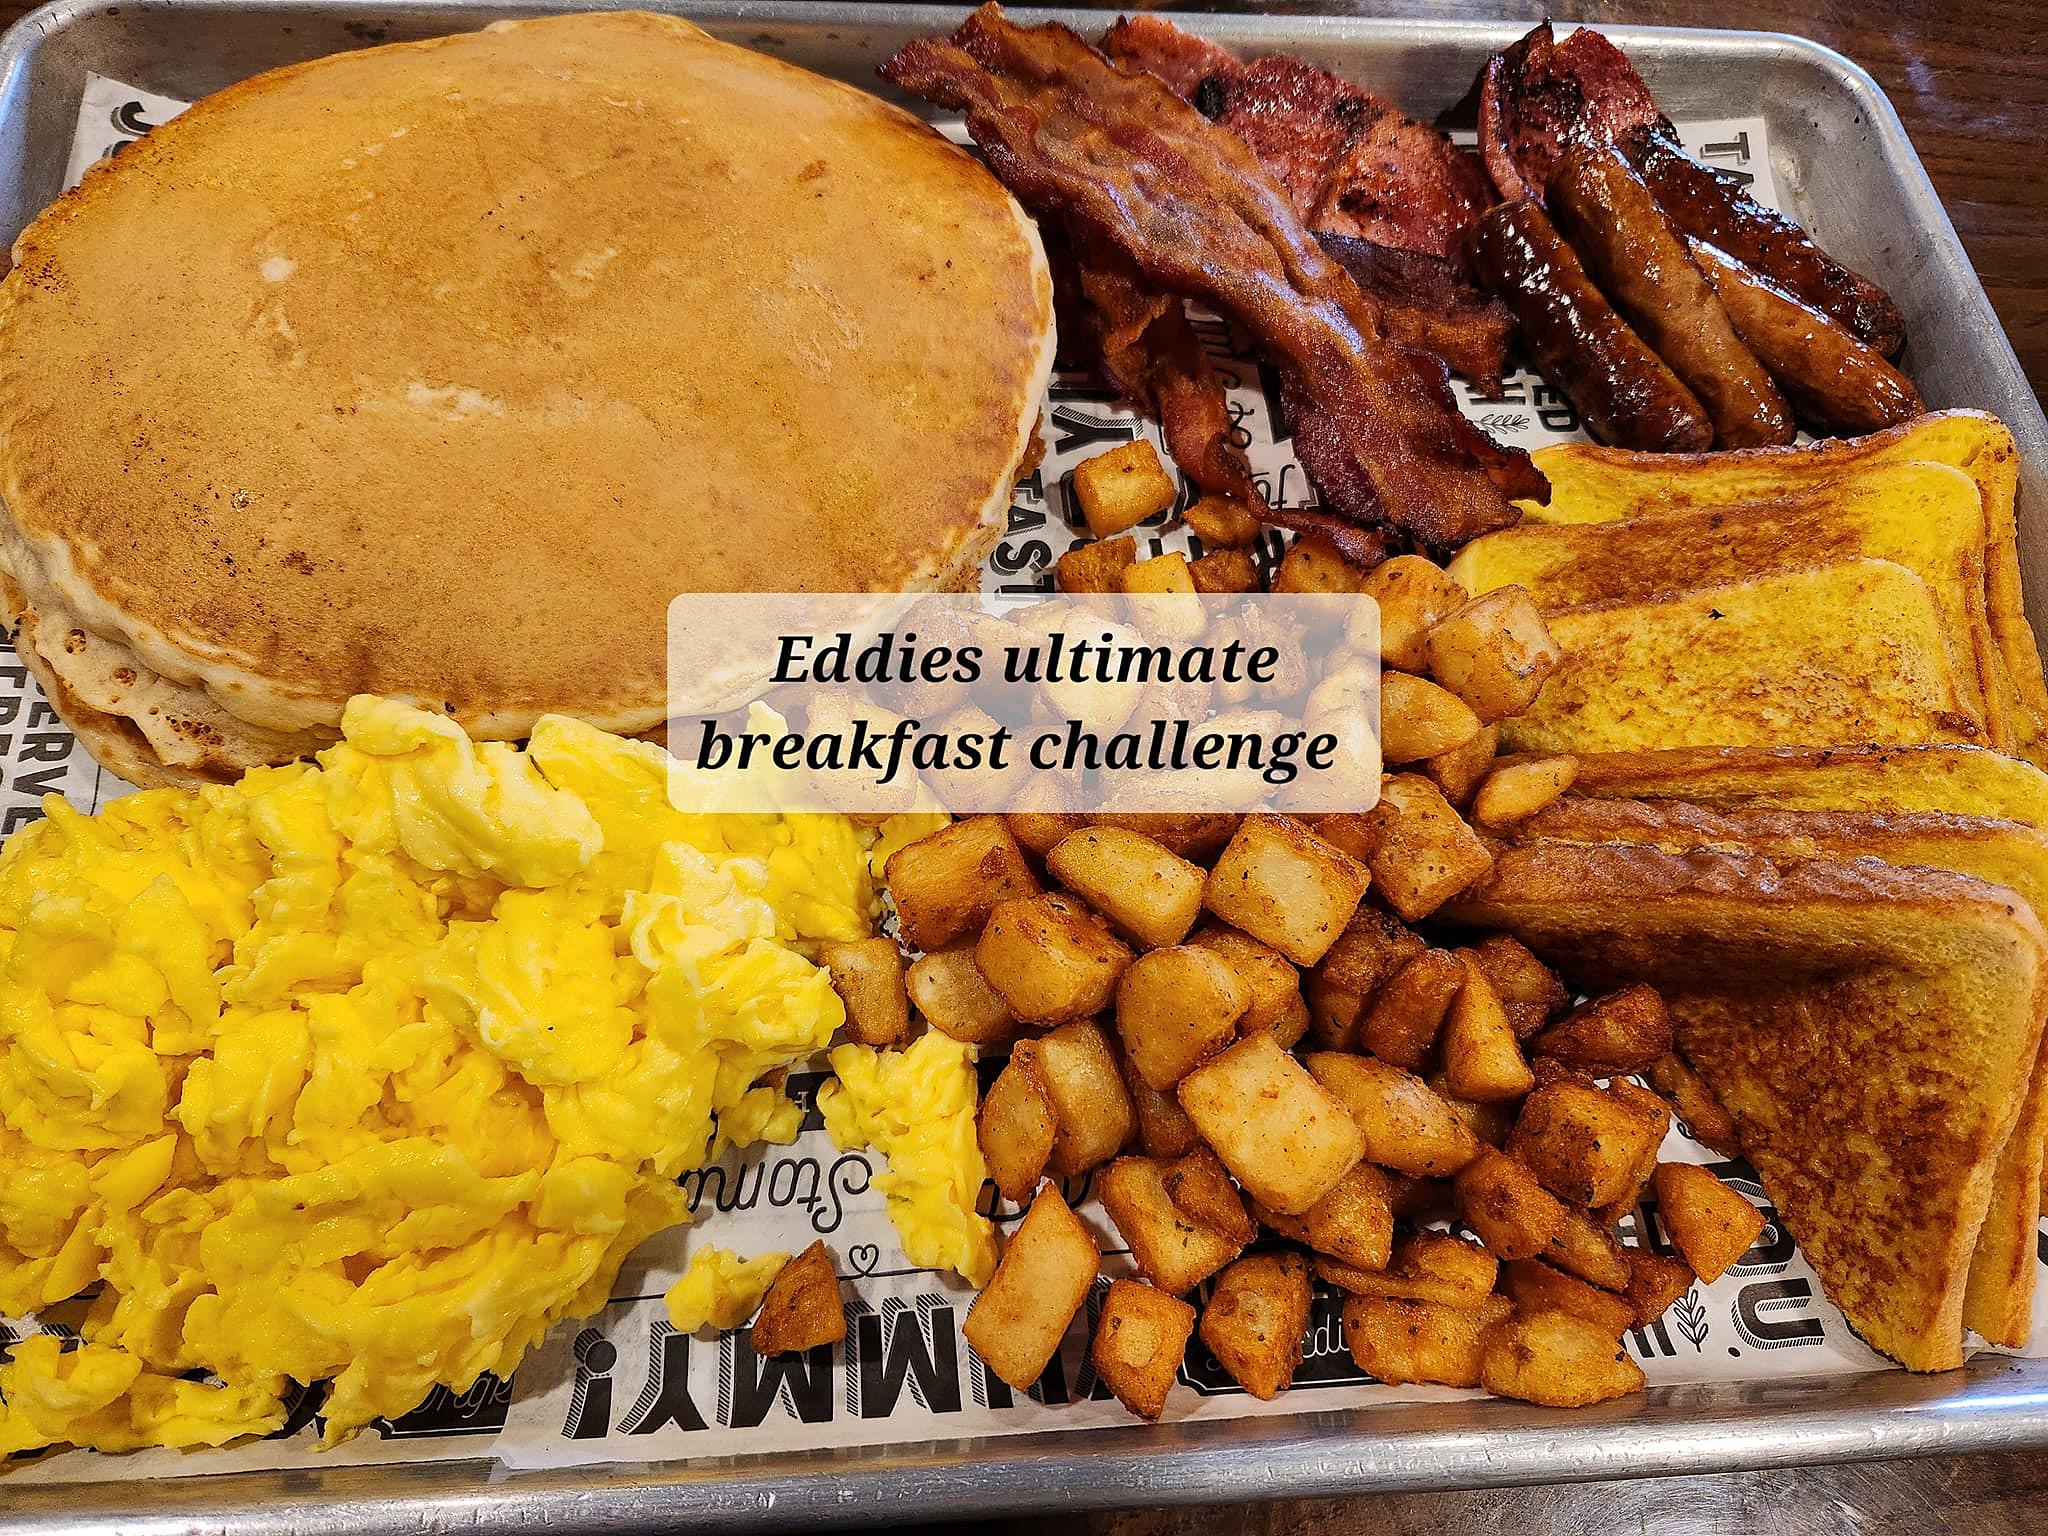 Delicious New York Breakfast Food Challenge is 1 You Want to Beat